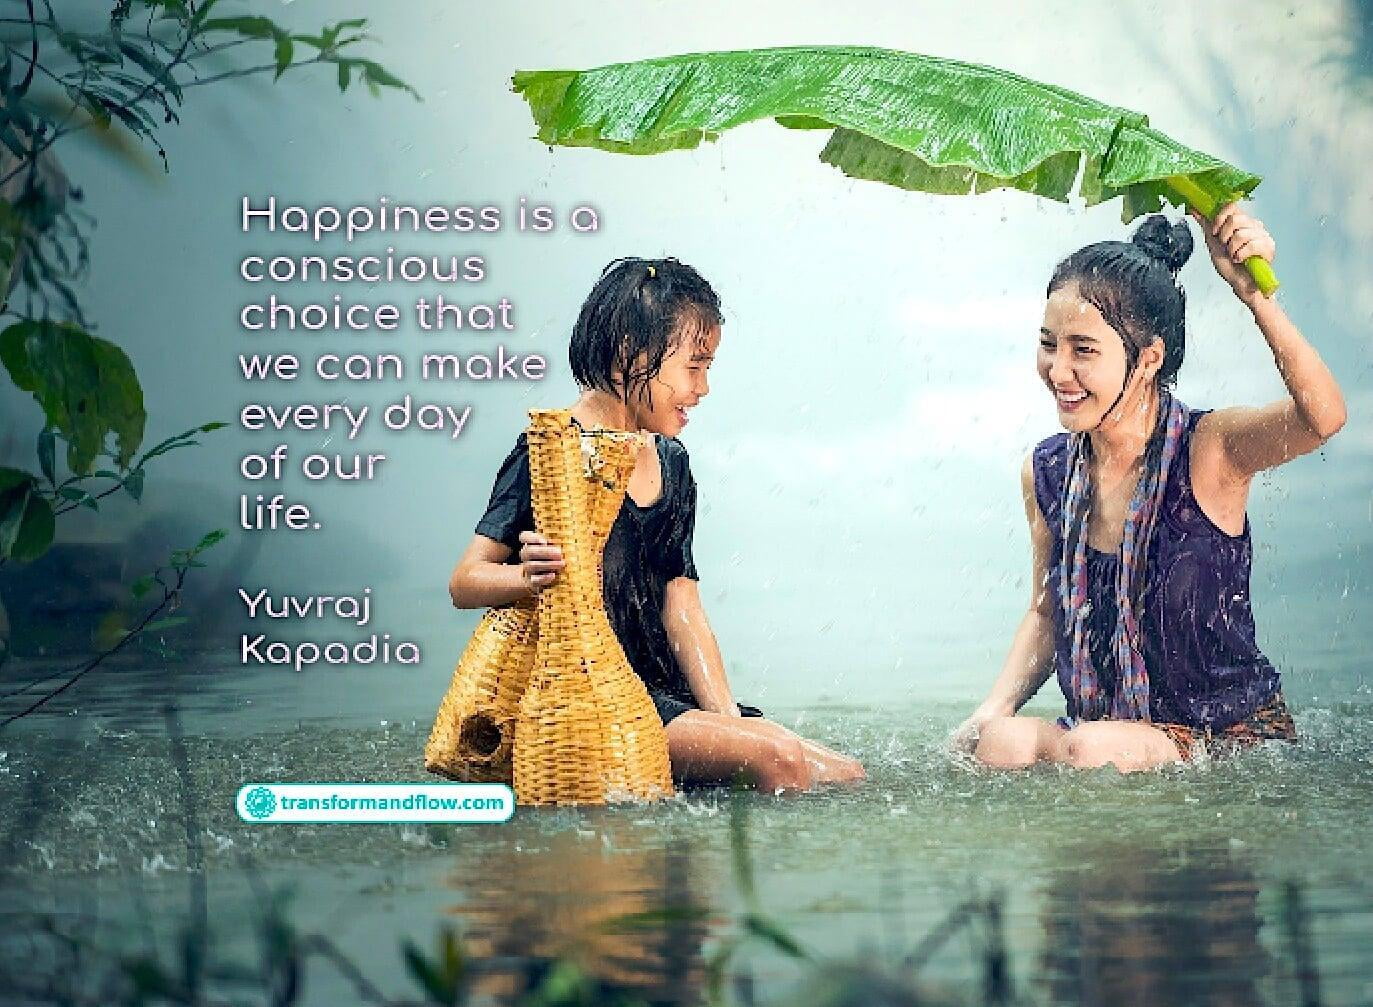 Can You Choose to Be Happy?